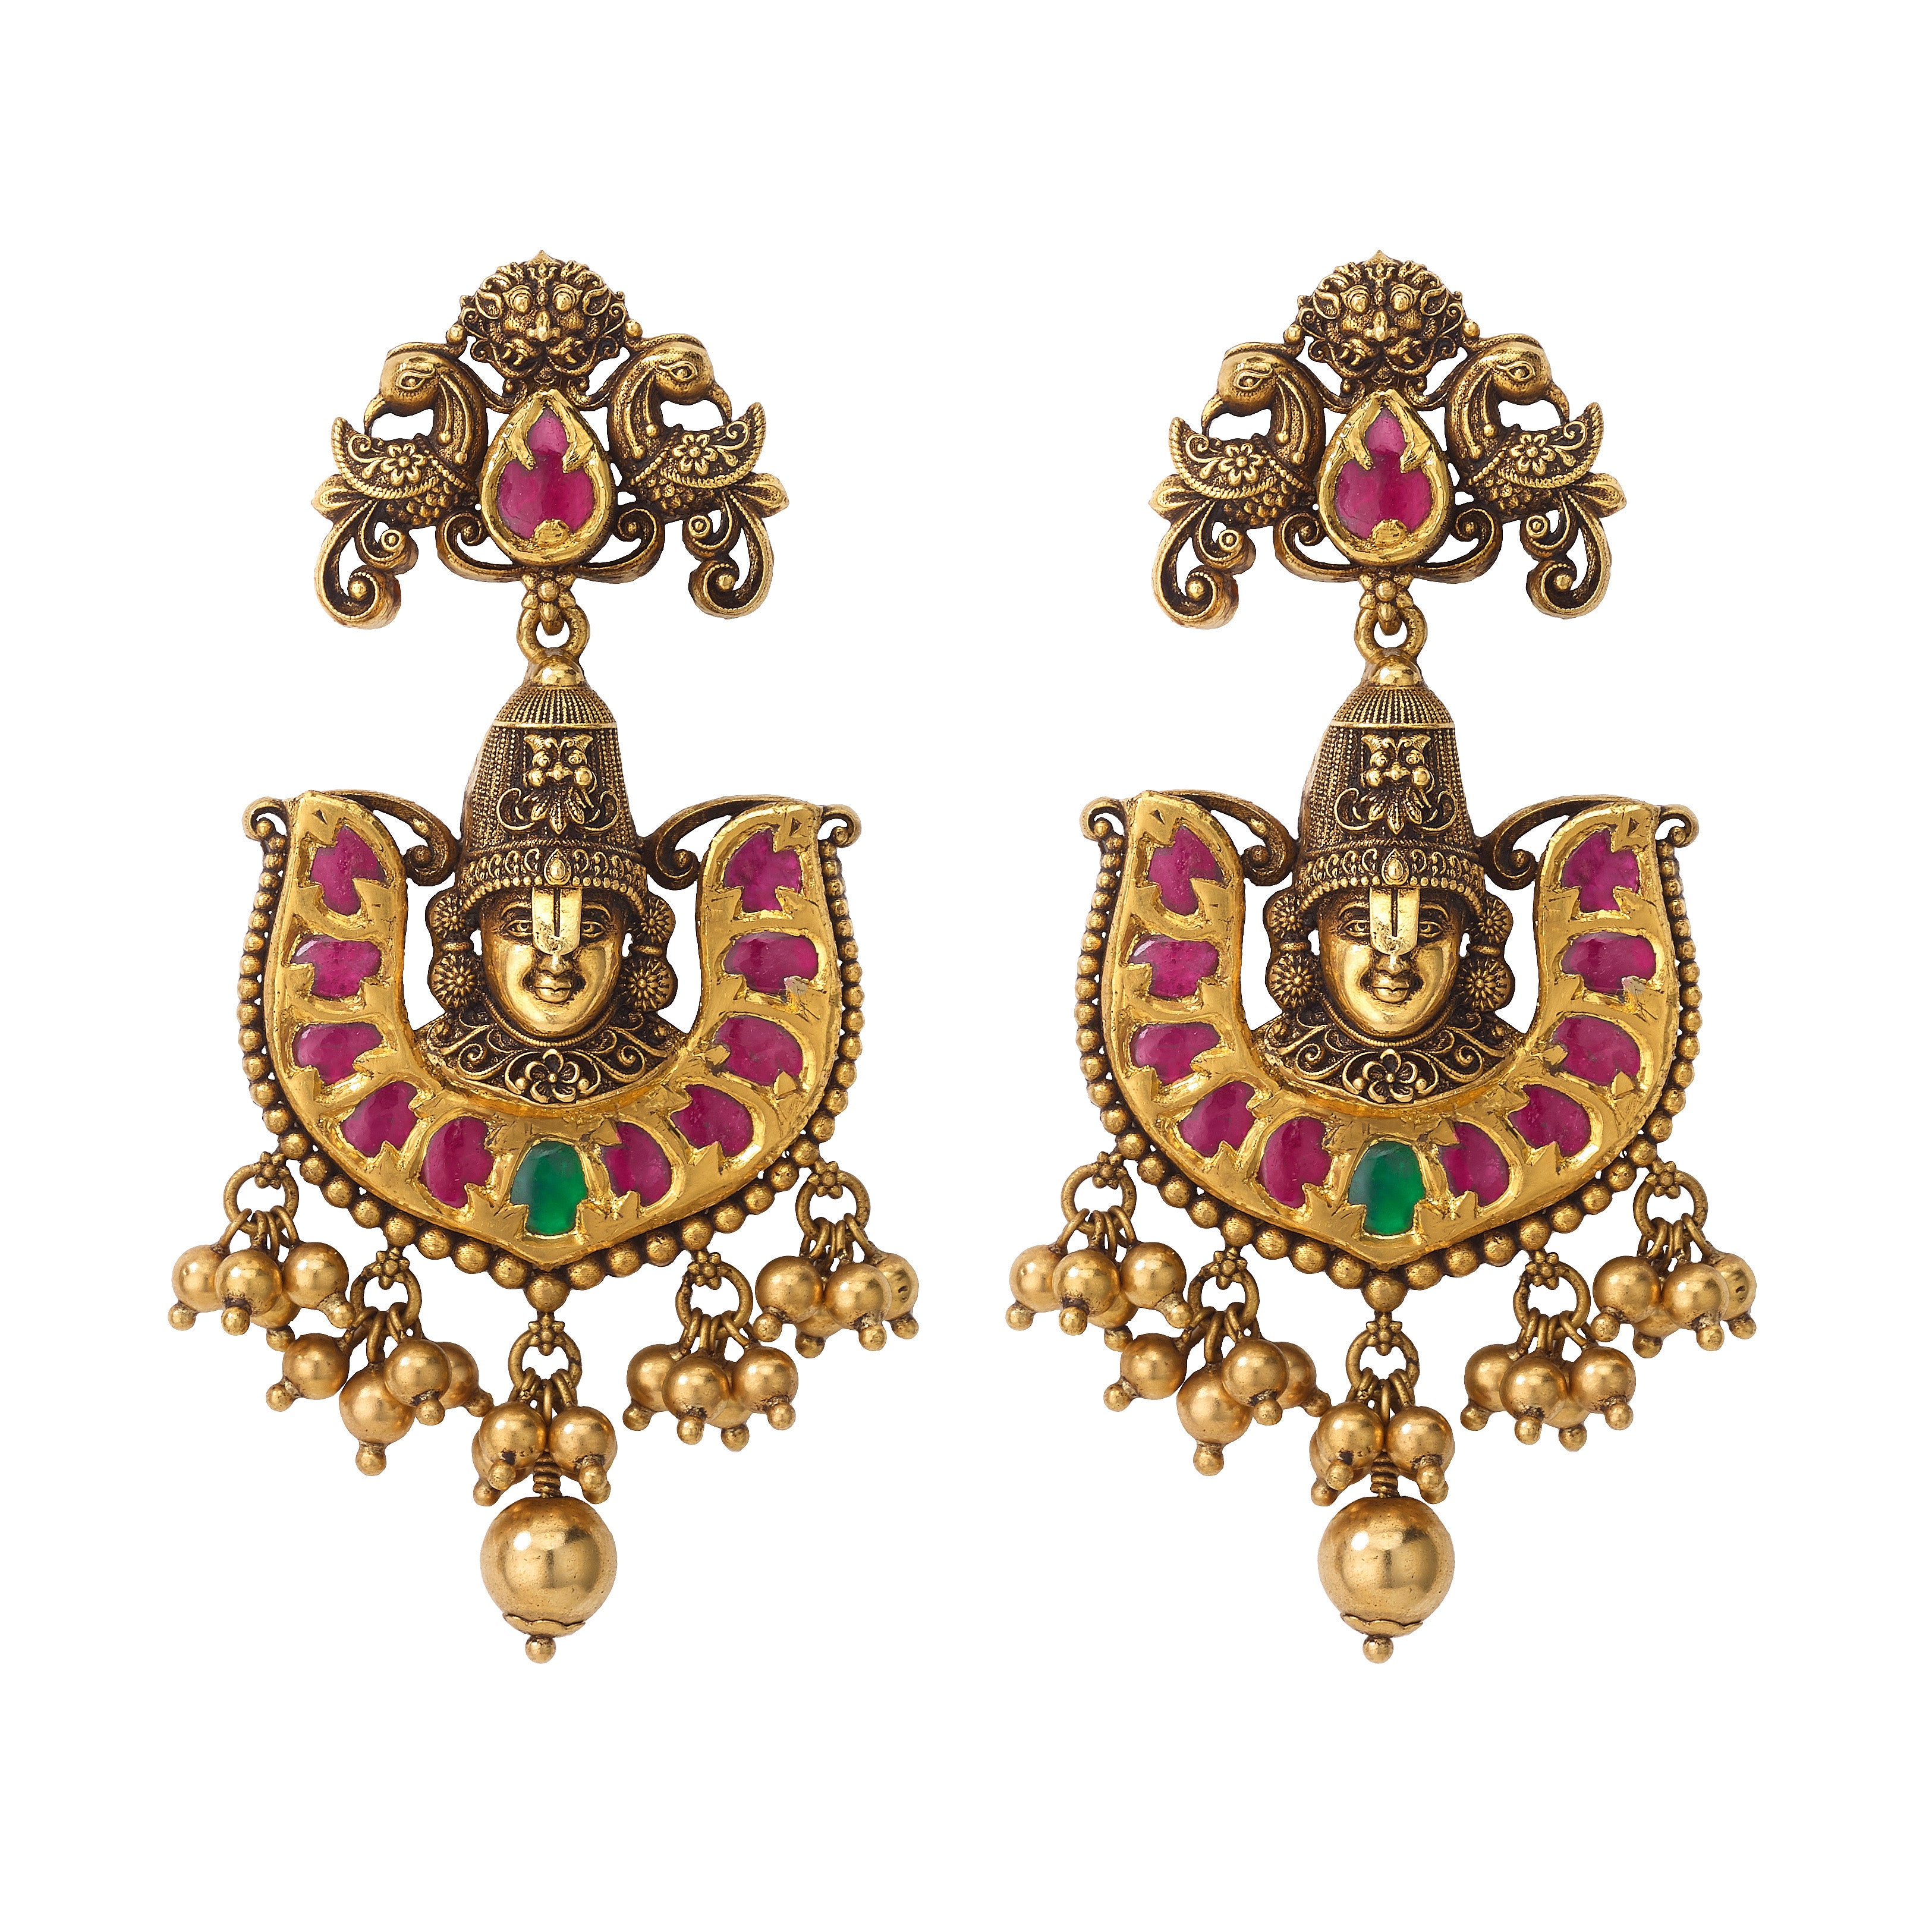 22k Gold Chand Bali Earrings with Rubies and Emeralds